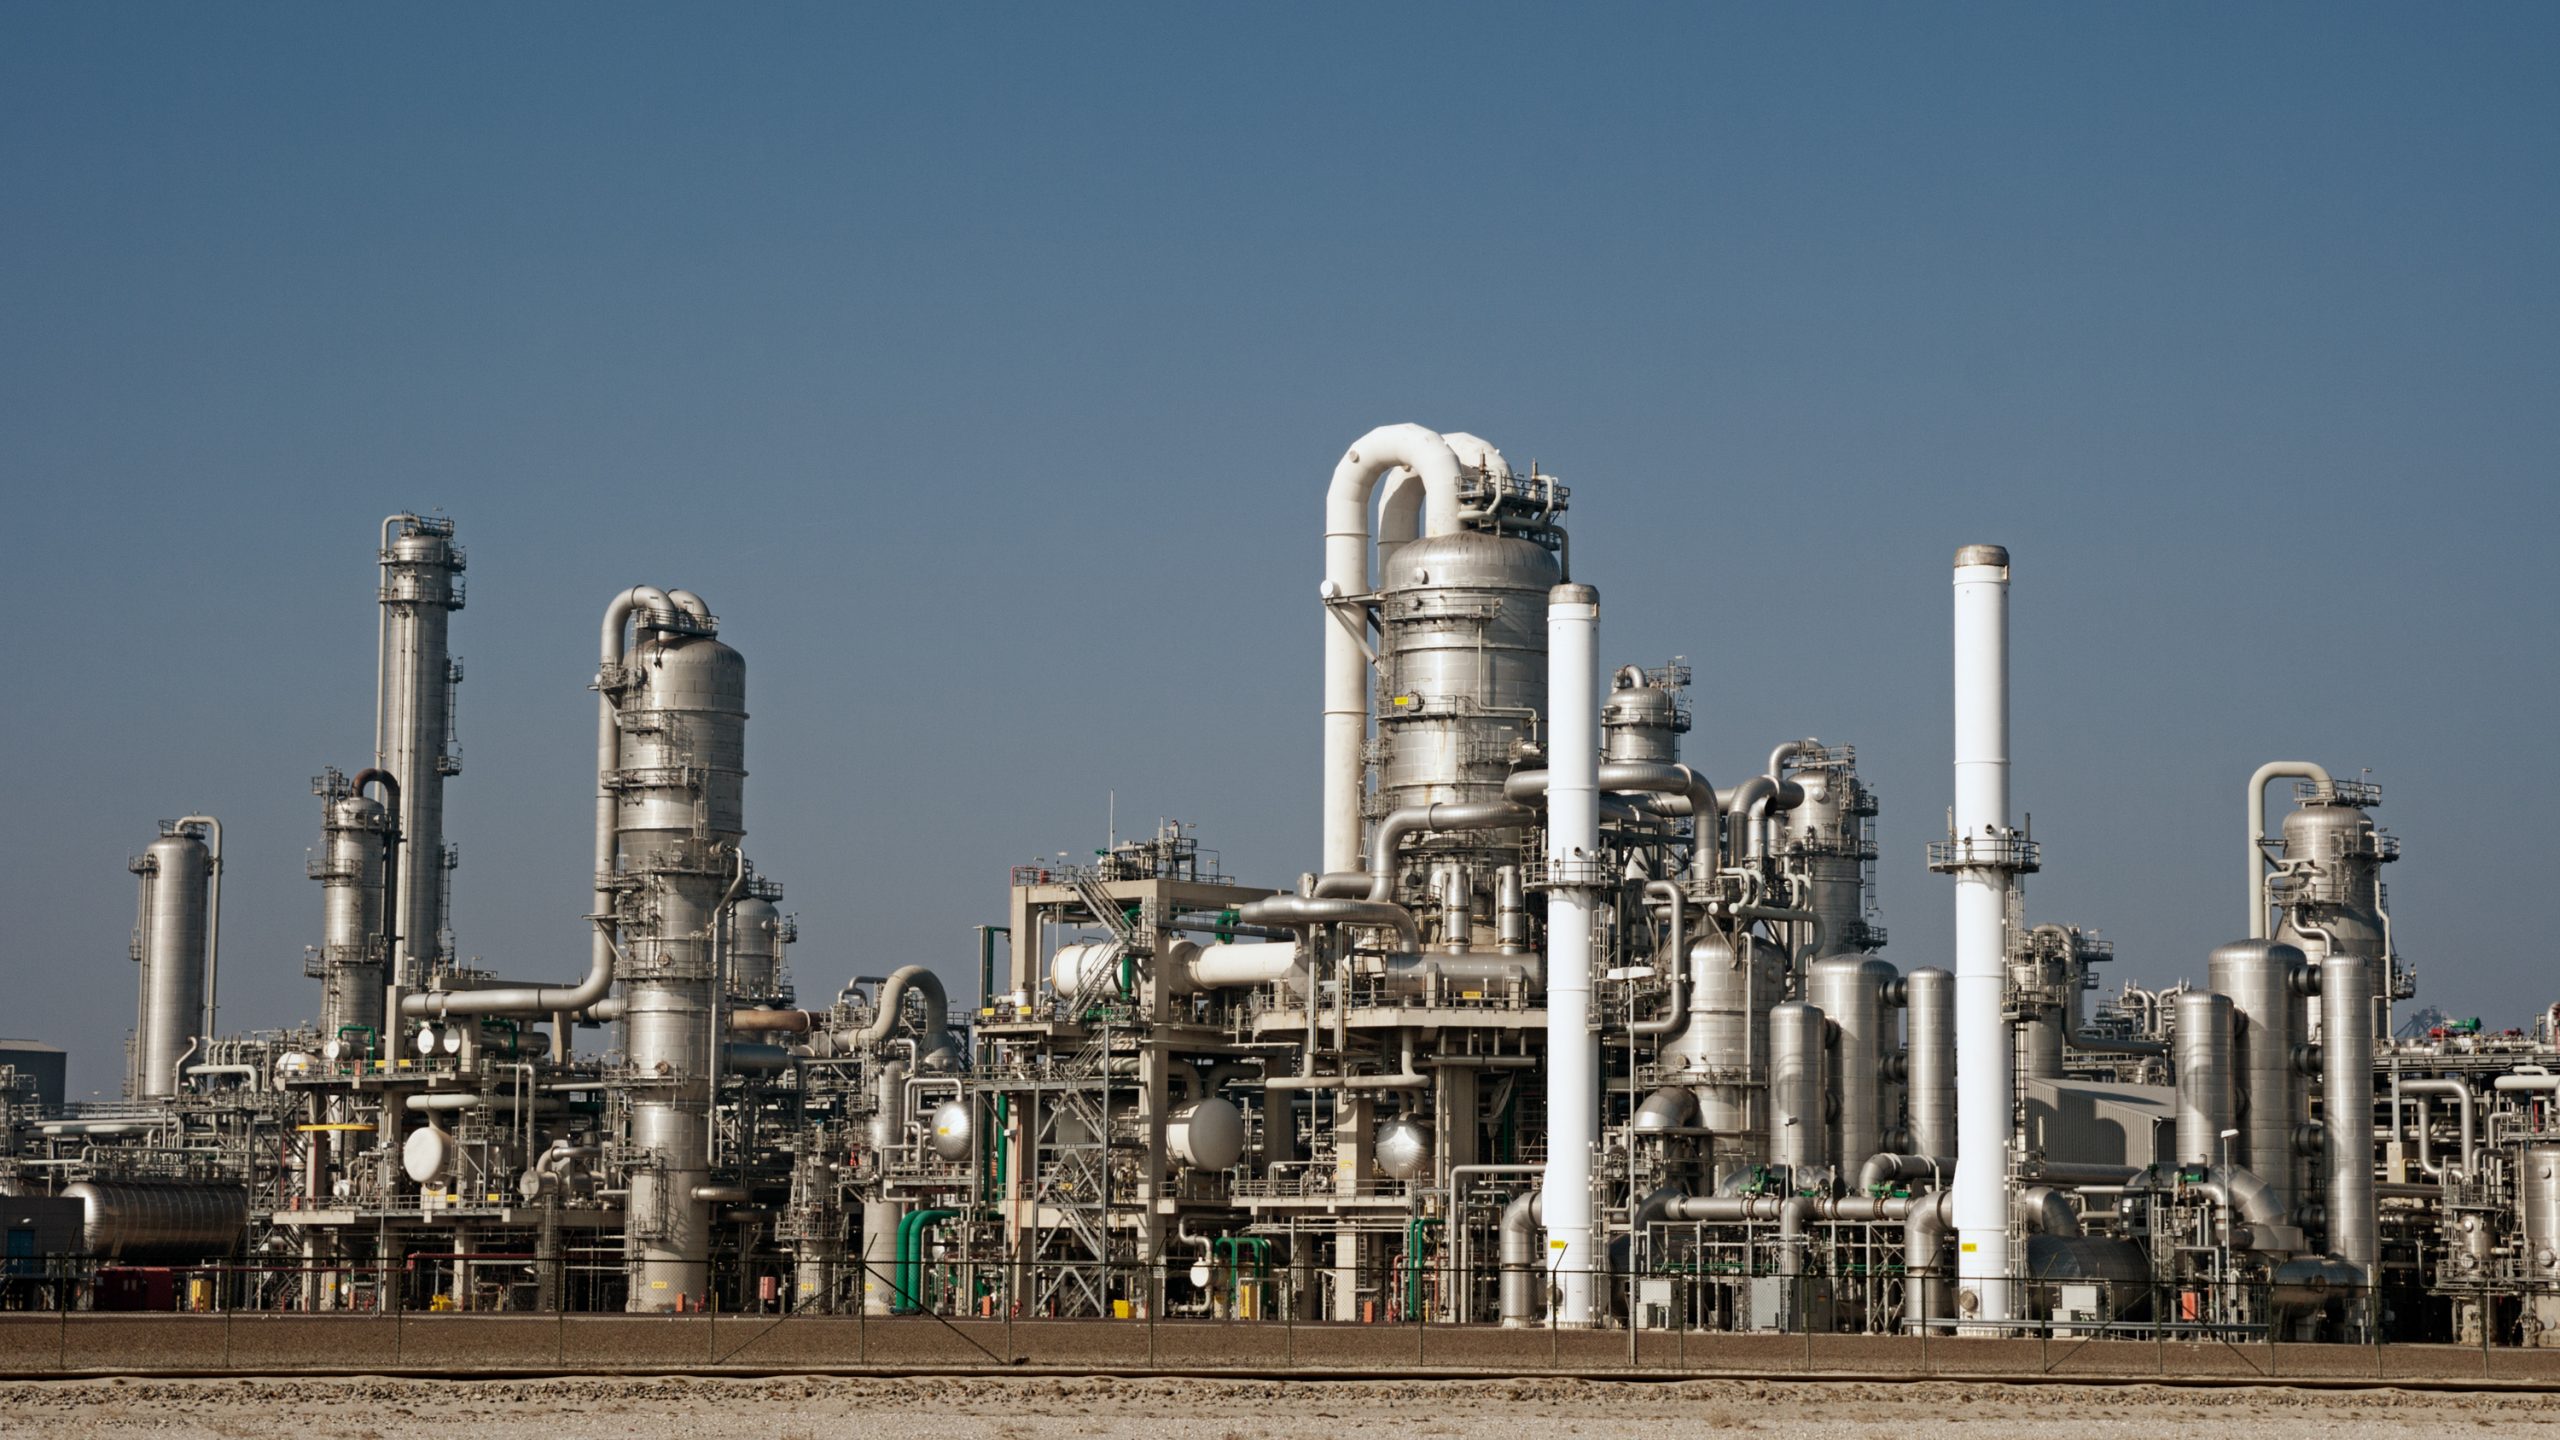 A petrochemical processing plant with various processing columns and towers.Industrial pipelines of an oil-refinery plant